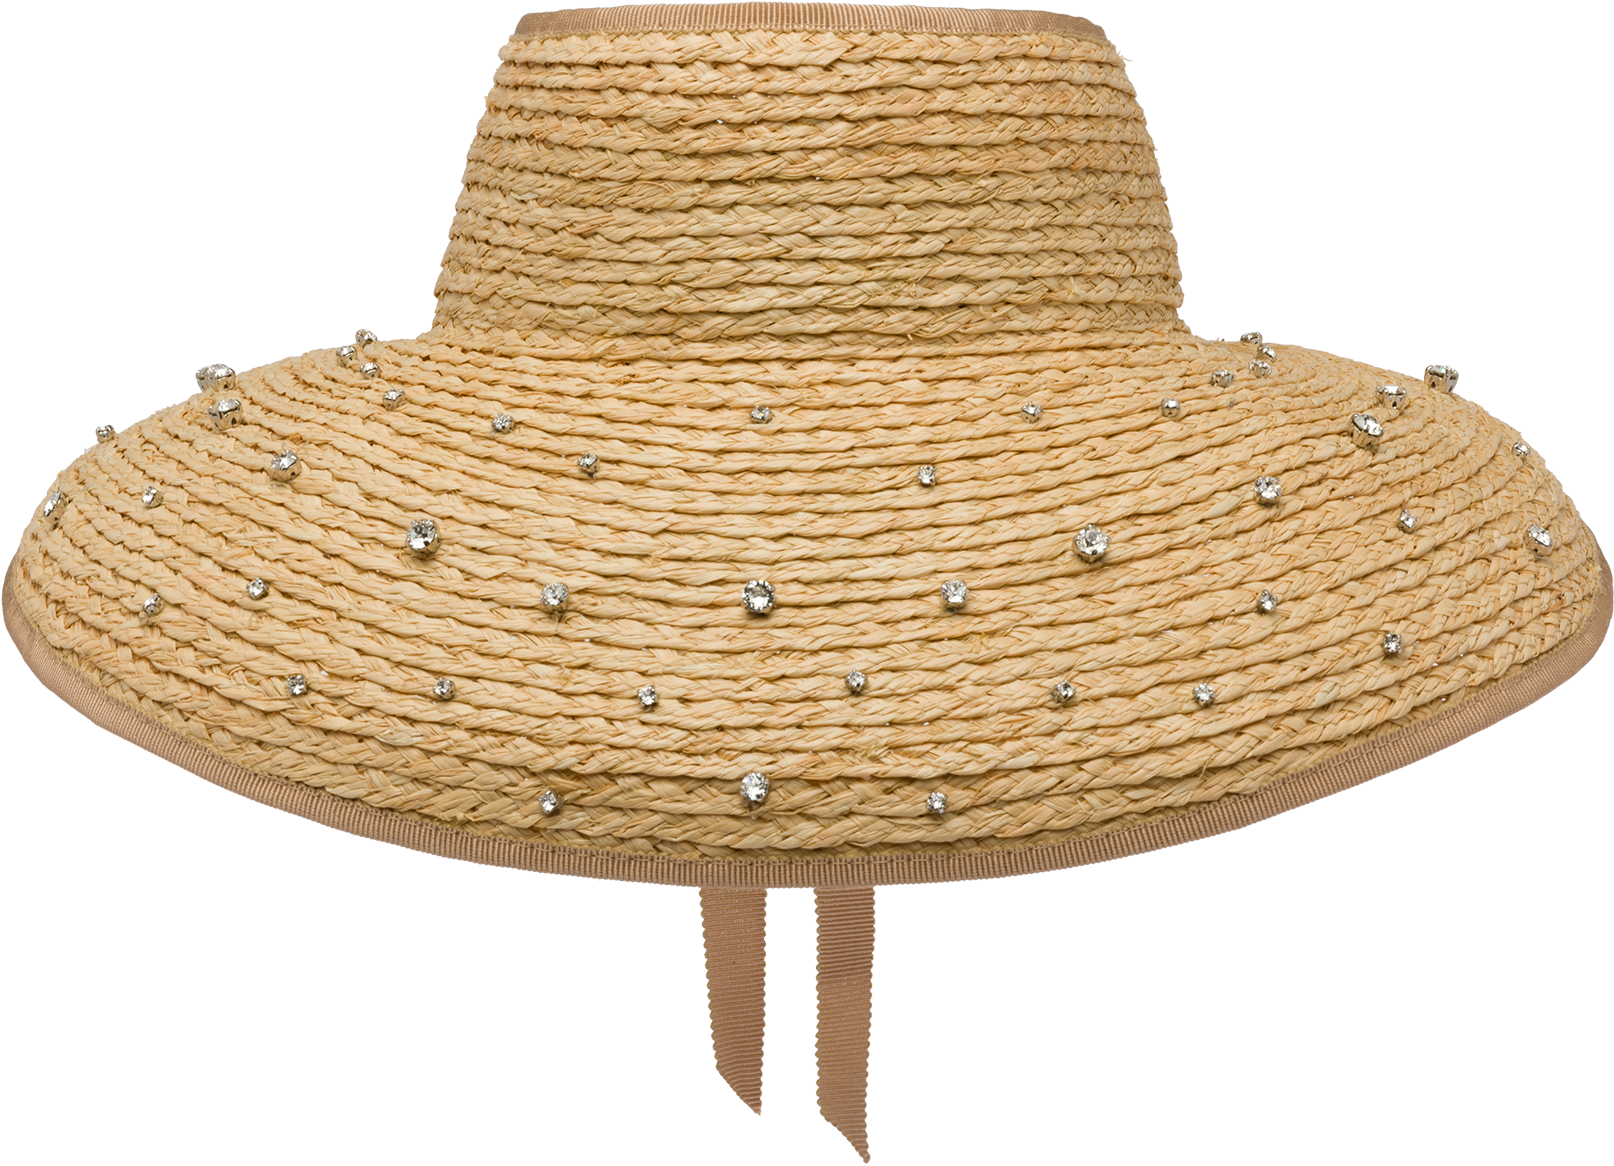 Embellished Straw Hat Product Photo PNG